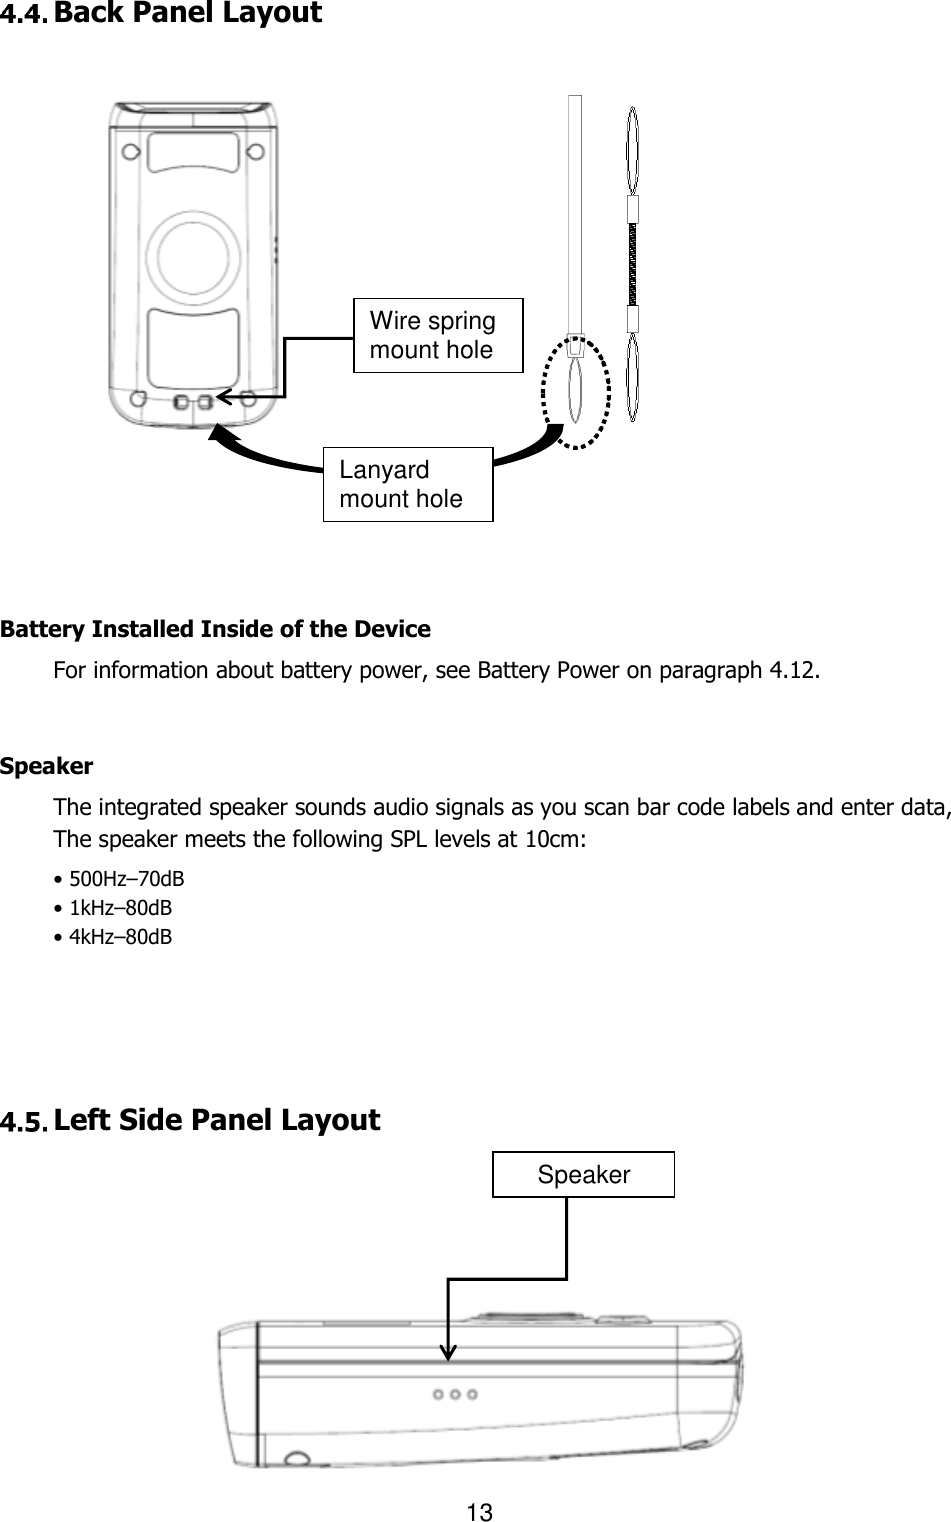                                                                    13   Back Panel Layout                             Battery Installed Inside of the Device For information about battery power, see Battery Power on paragraph 4.12.   Speaker The integrated speaker sounds audio signals as you scan bar code labels and enter data,   The speaker meets the following SPL levels at 10cm: • 500Hz–70dB • 1kHz–80dB • 4kHz–80dB       Left Side Panel Layout              Wire spring mount hole Lanyard mount hole Speaker 